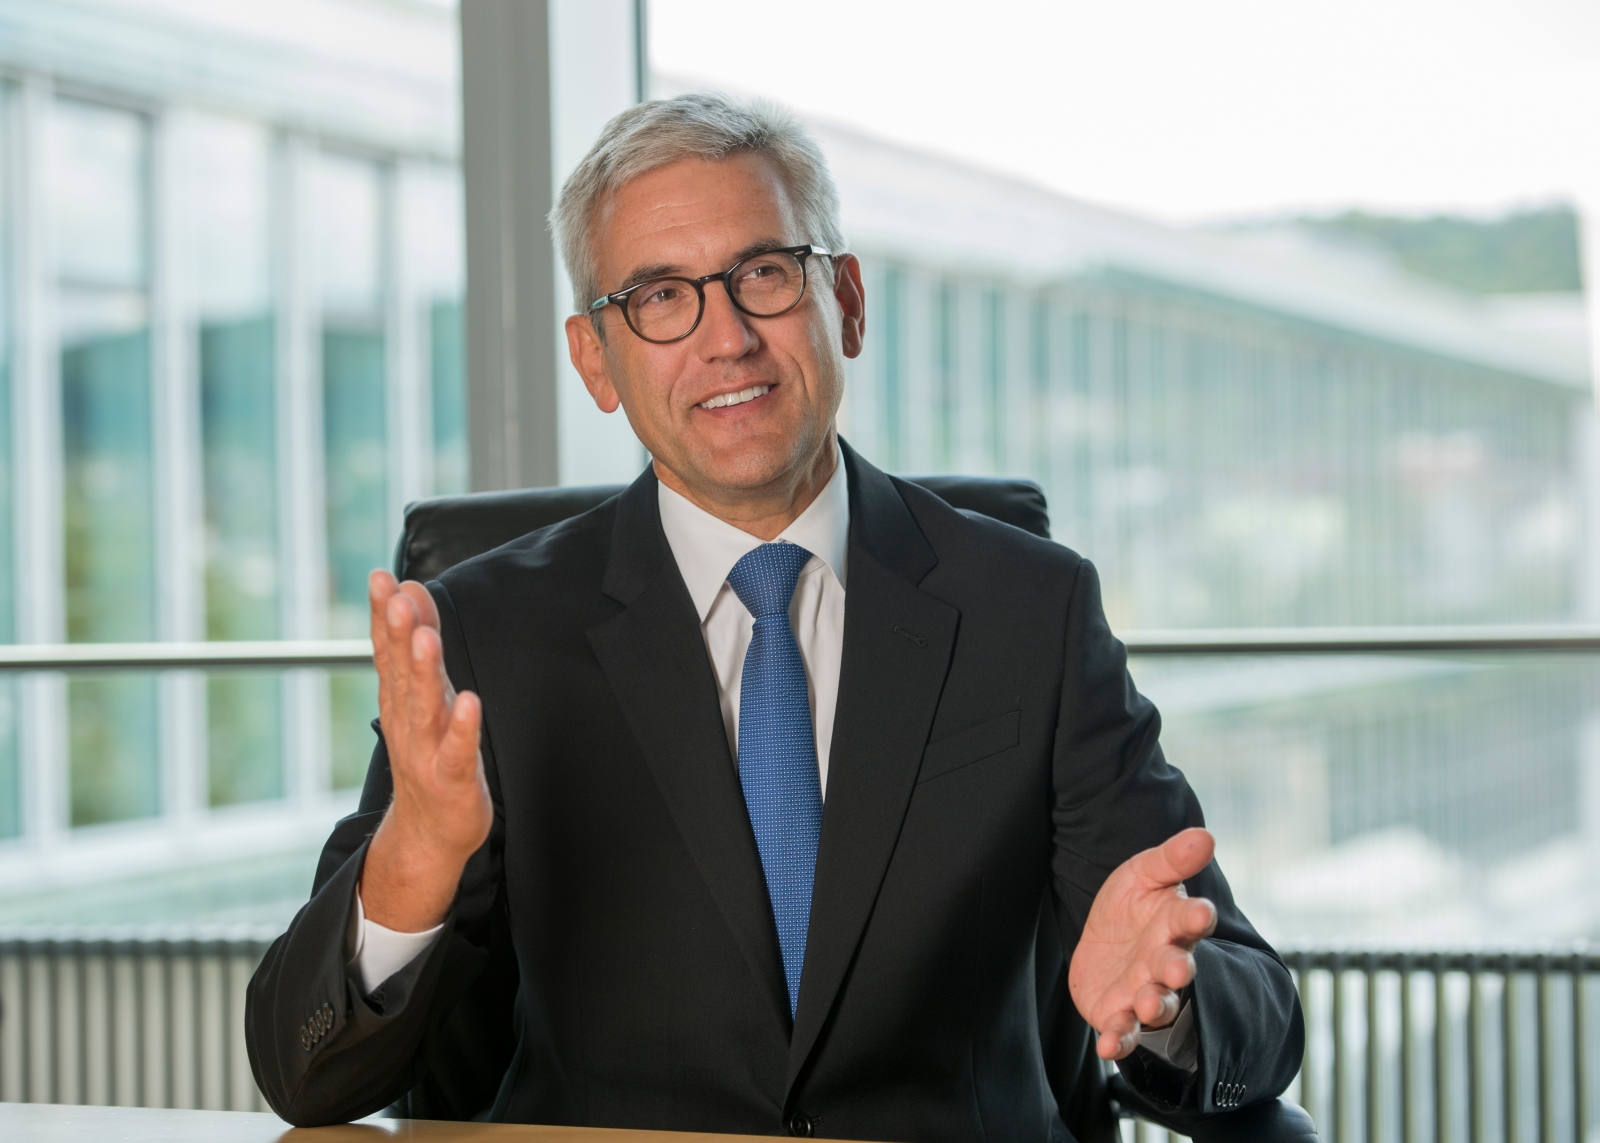 Ulrich Spiesshofer. Chief Executive Officer of ABB